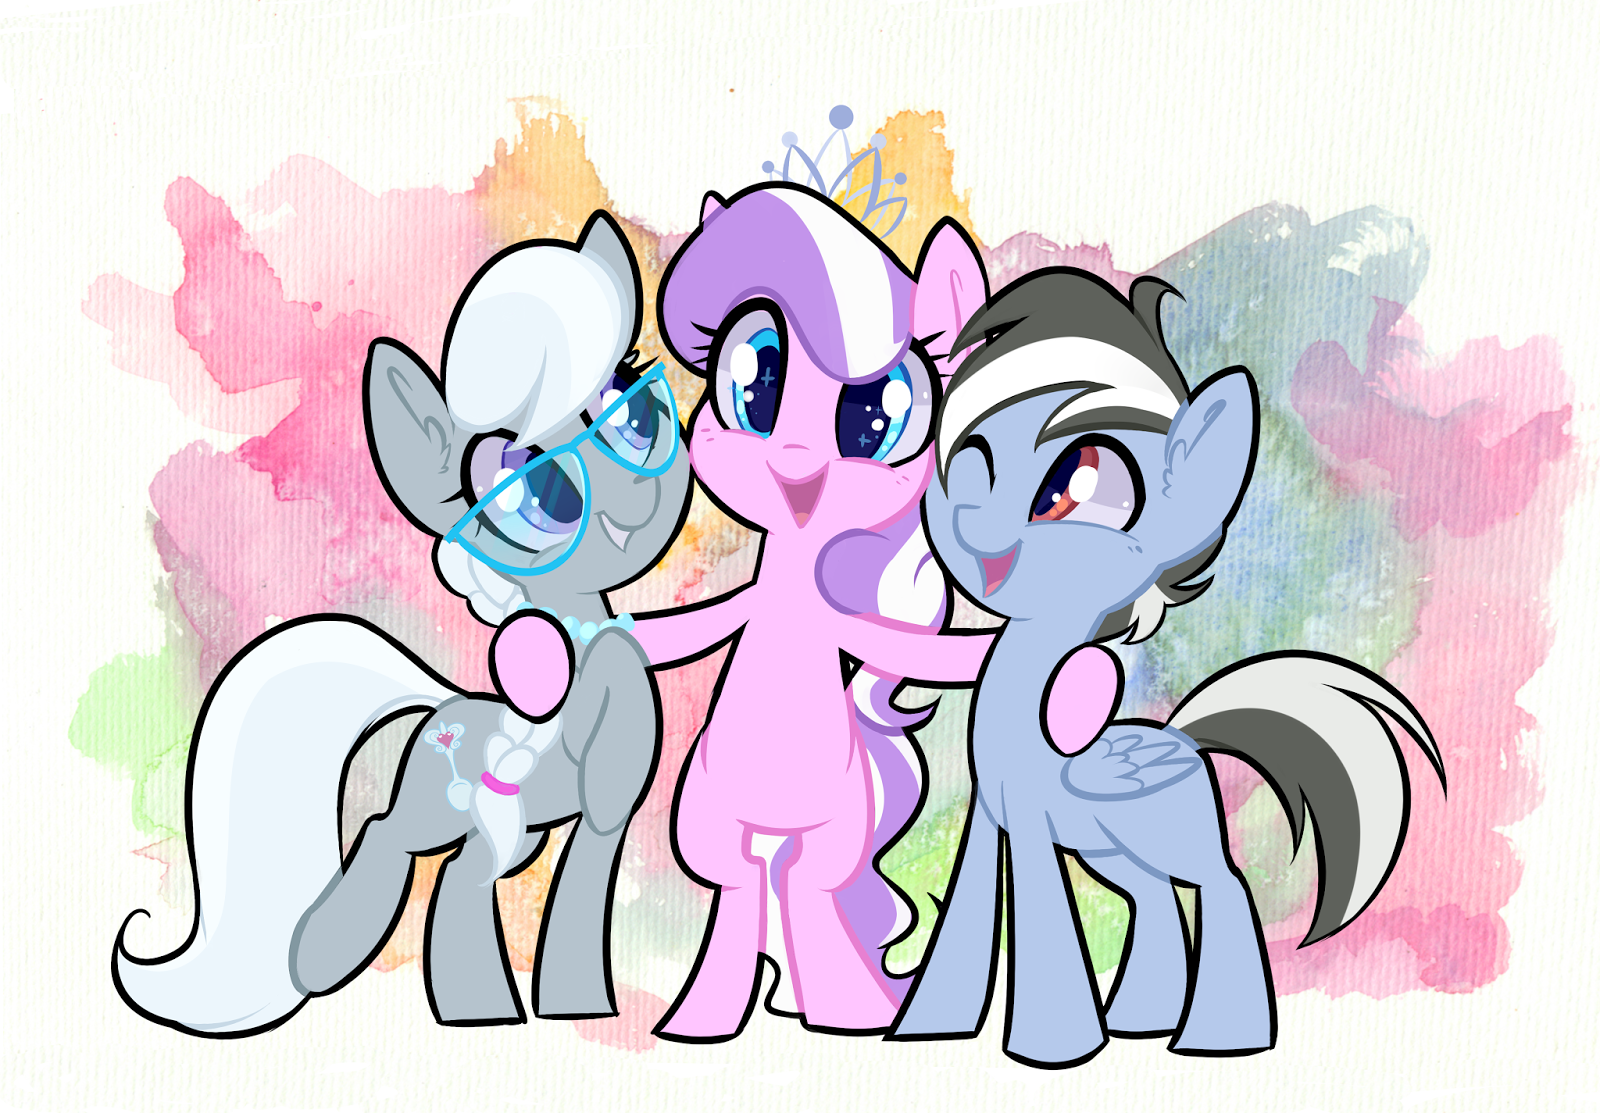 EFNW 2016: Chantal Strand & Shannon Chan-Kent to Attend.